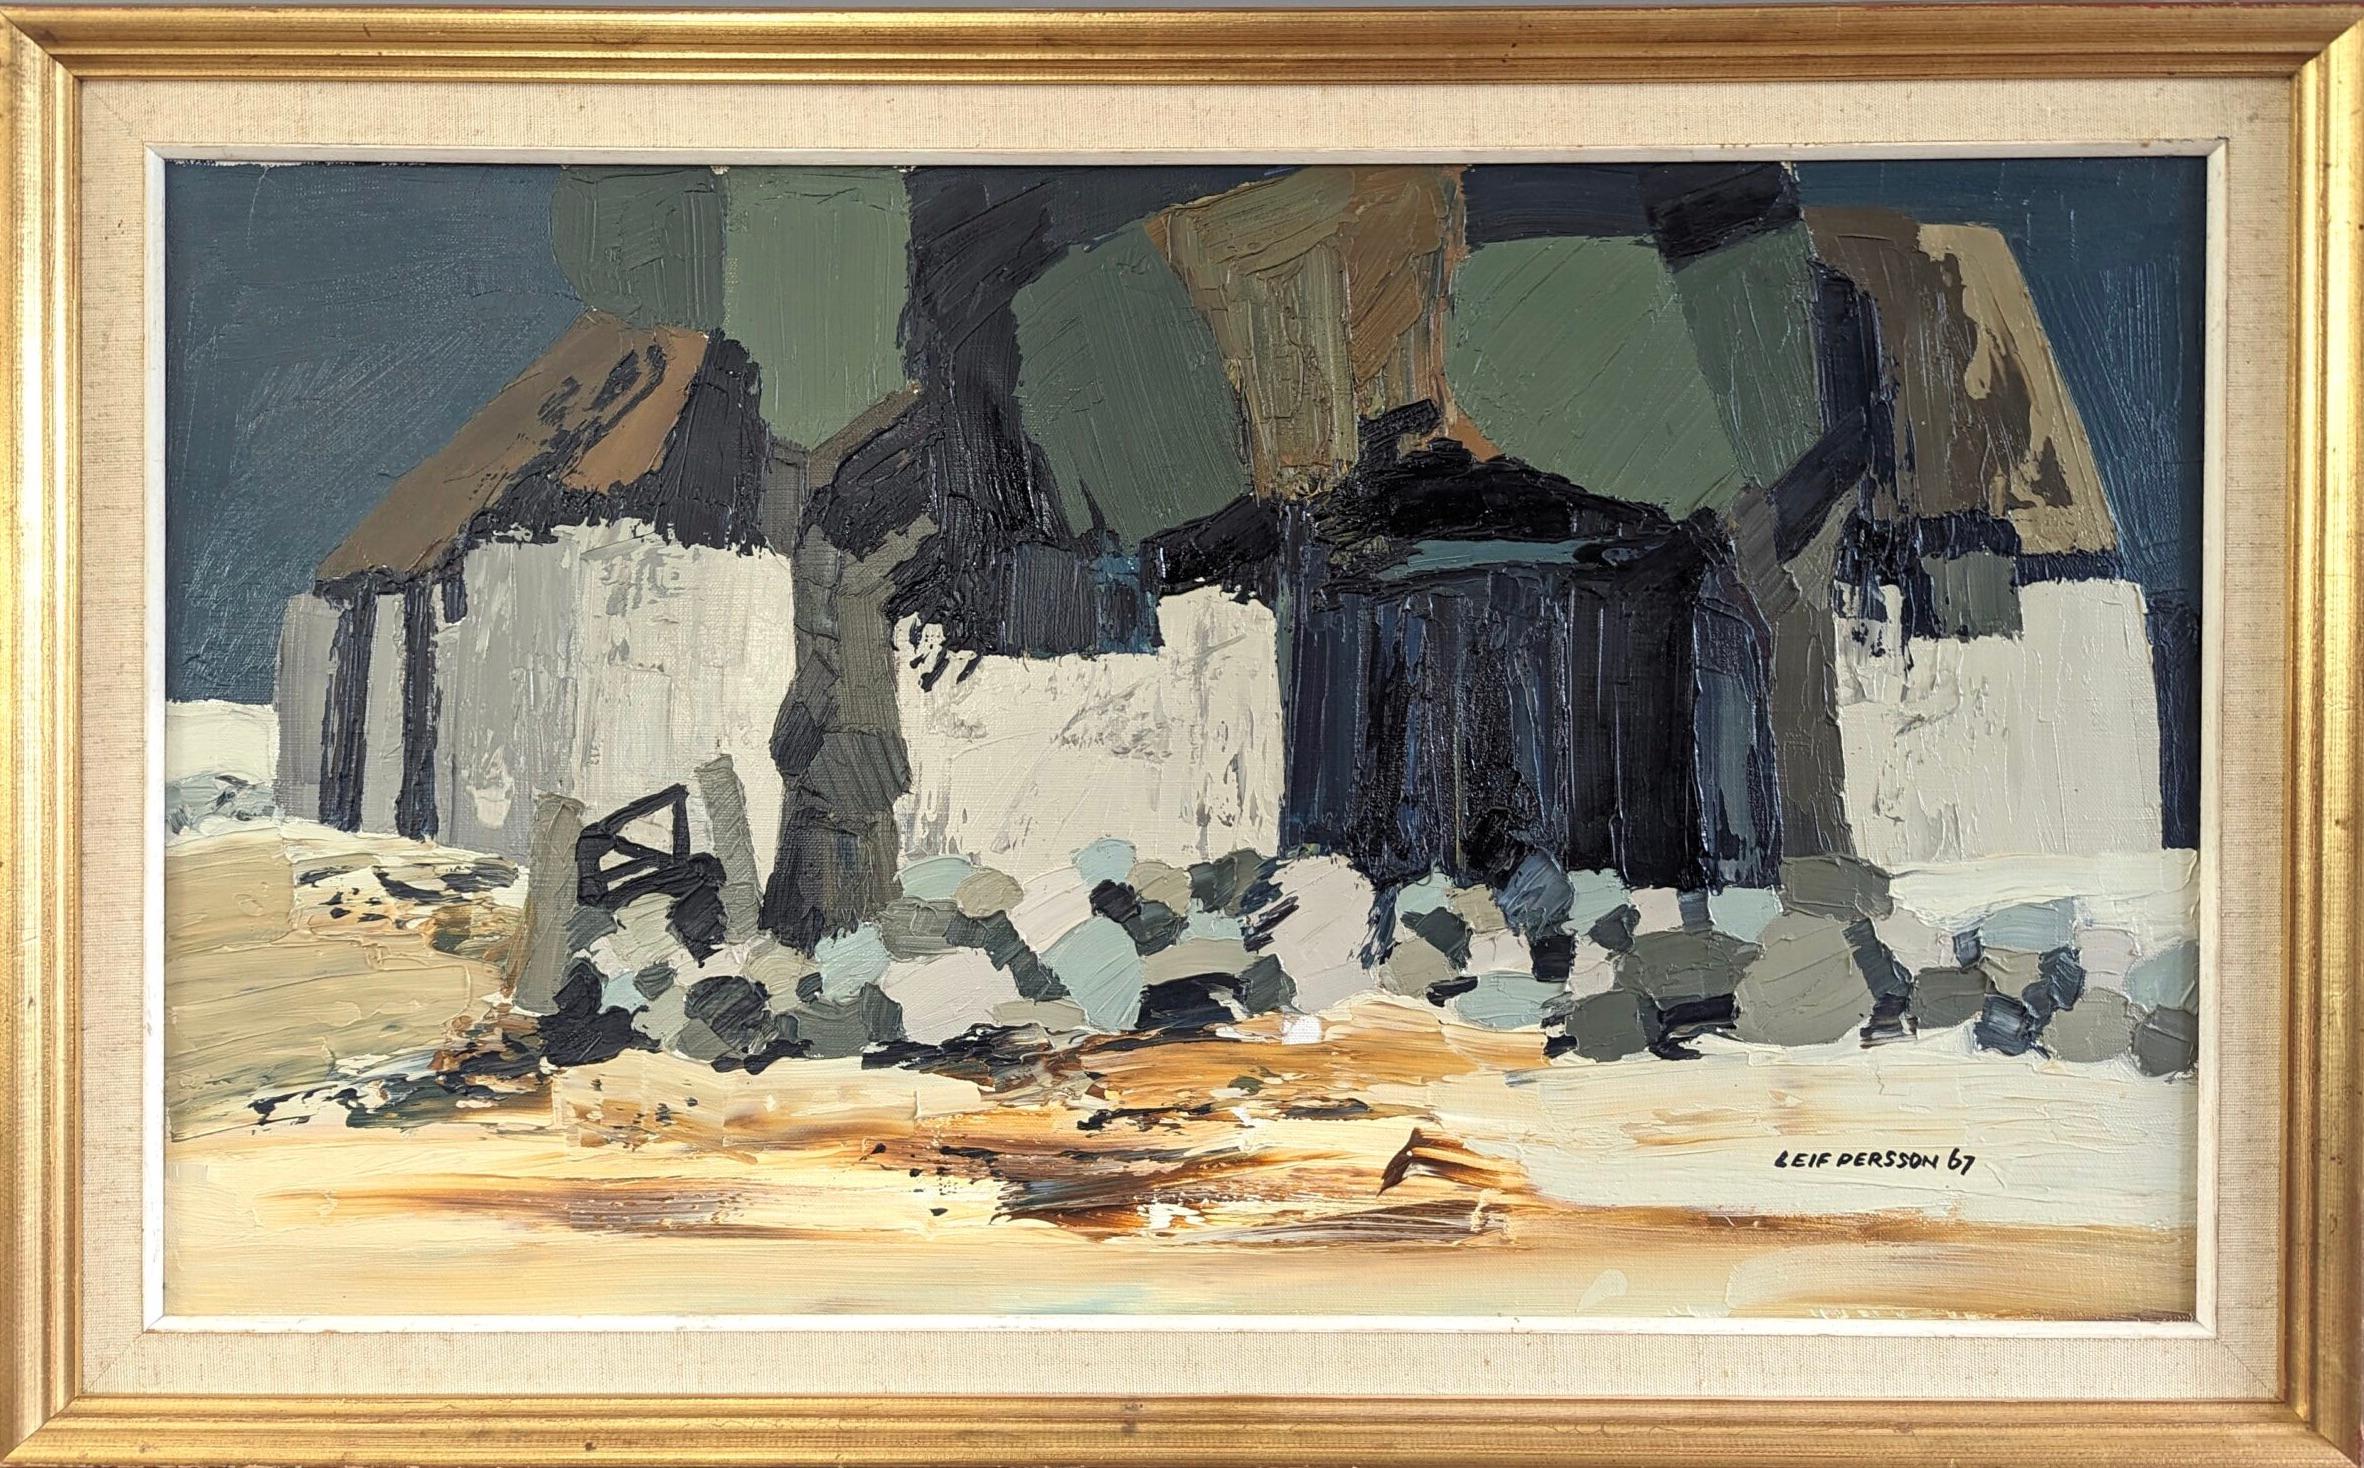 1967 Vintage Mid-Century Abstract Landscape Oil Painting - Nature Dwellings